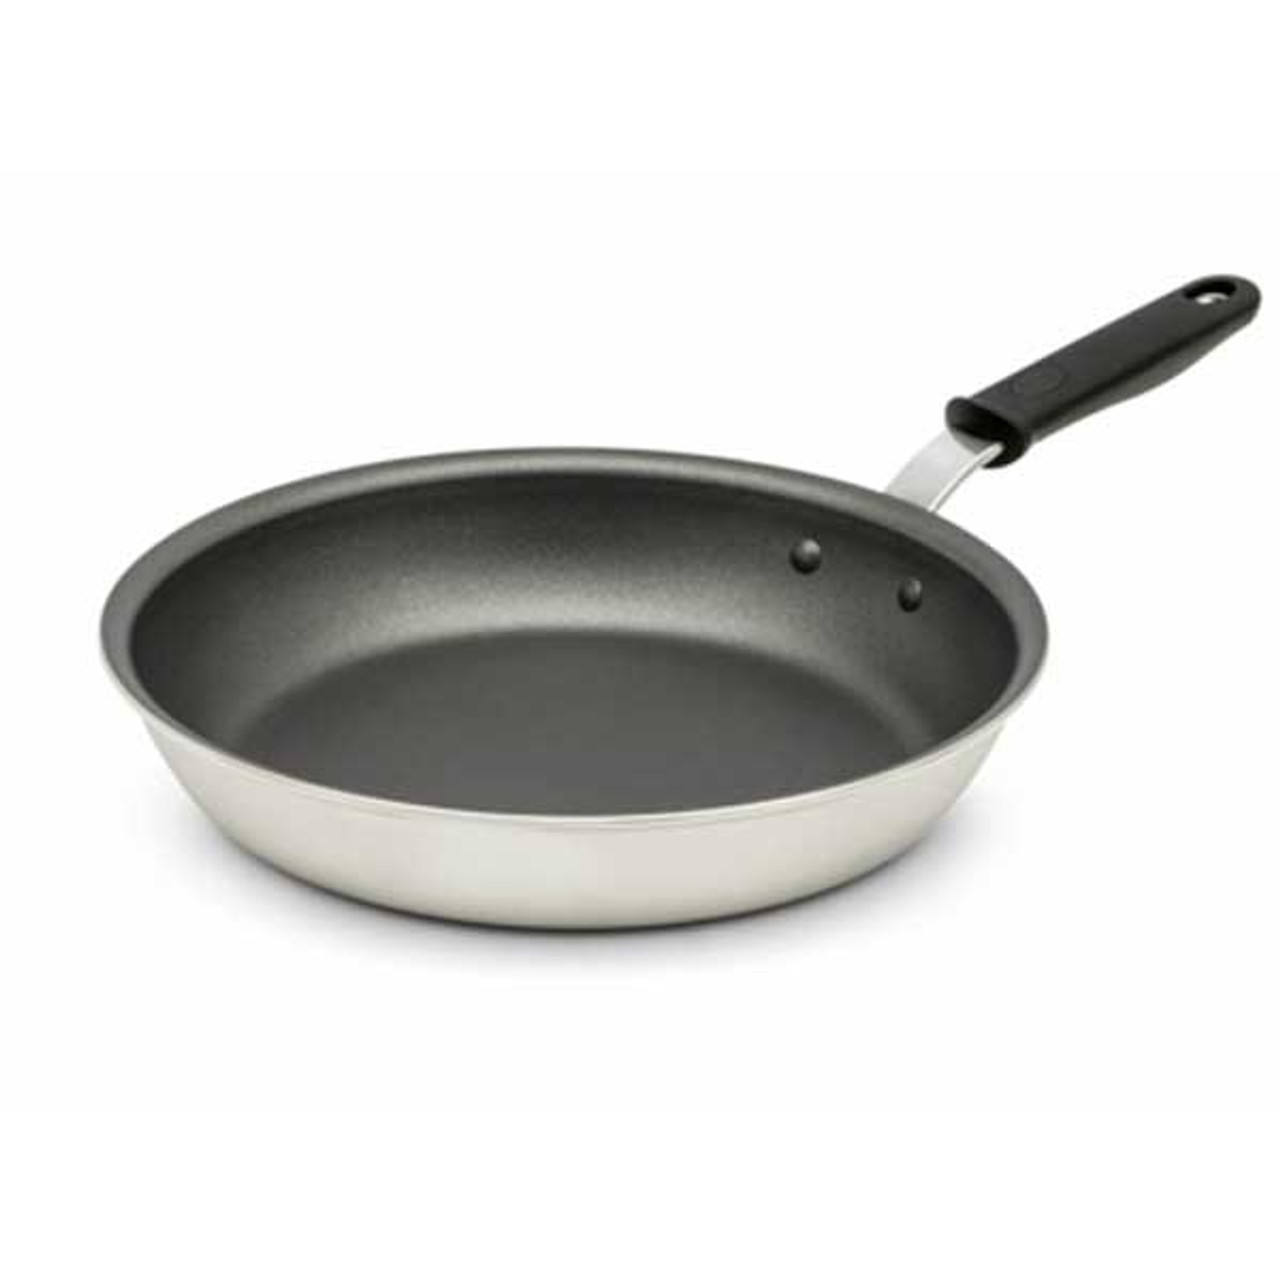 https://cdn11.bigcommerce.com/s-g3i86bef61/images/stencil/1280x1280/products/1704/4746/Vollrath-672312-Fry-Pan-12__75432.1682434062.jpg?c=1